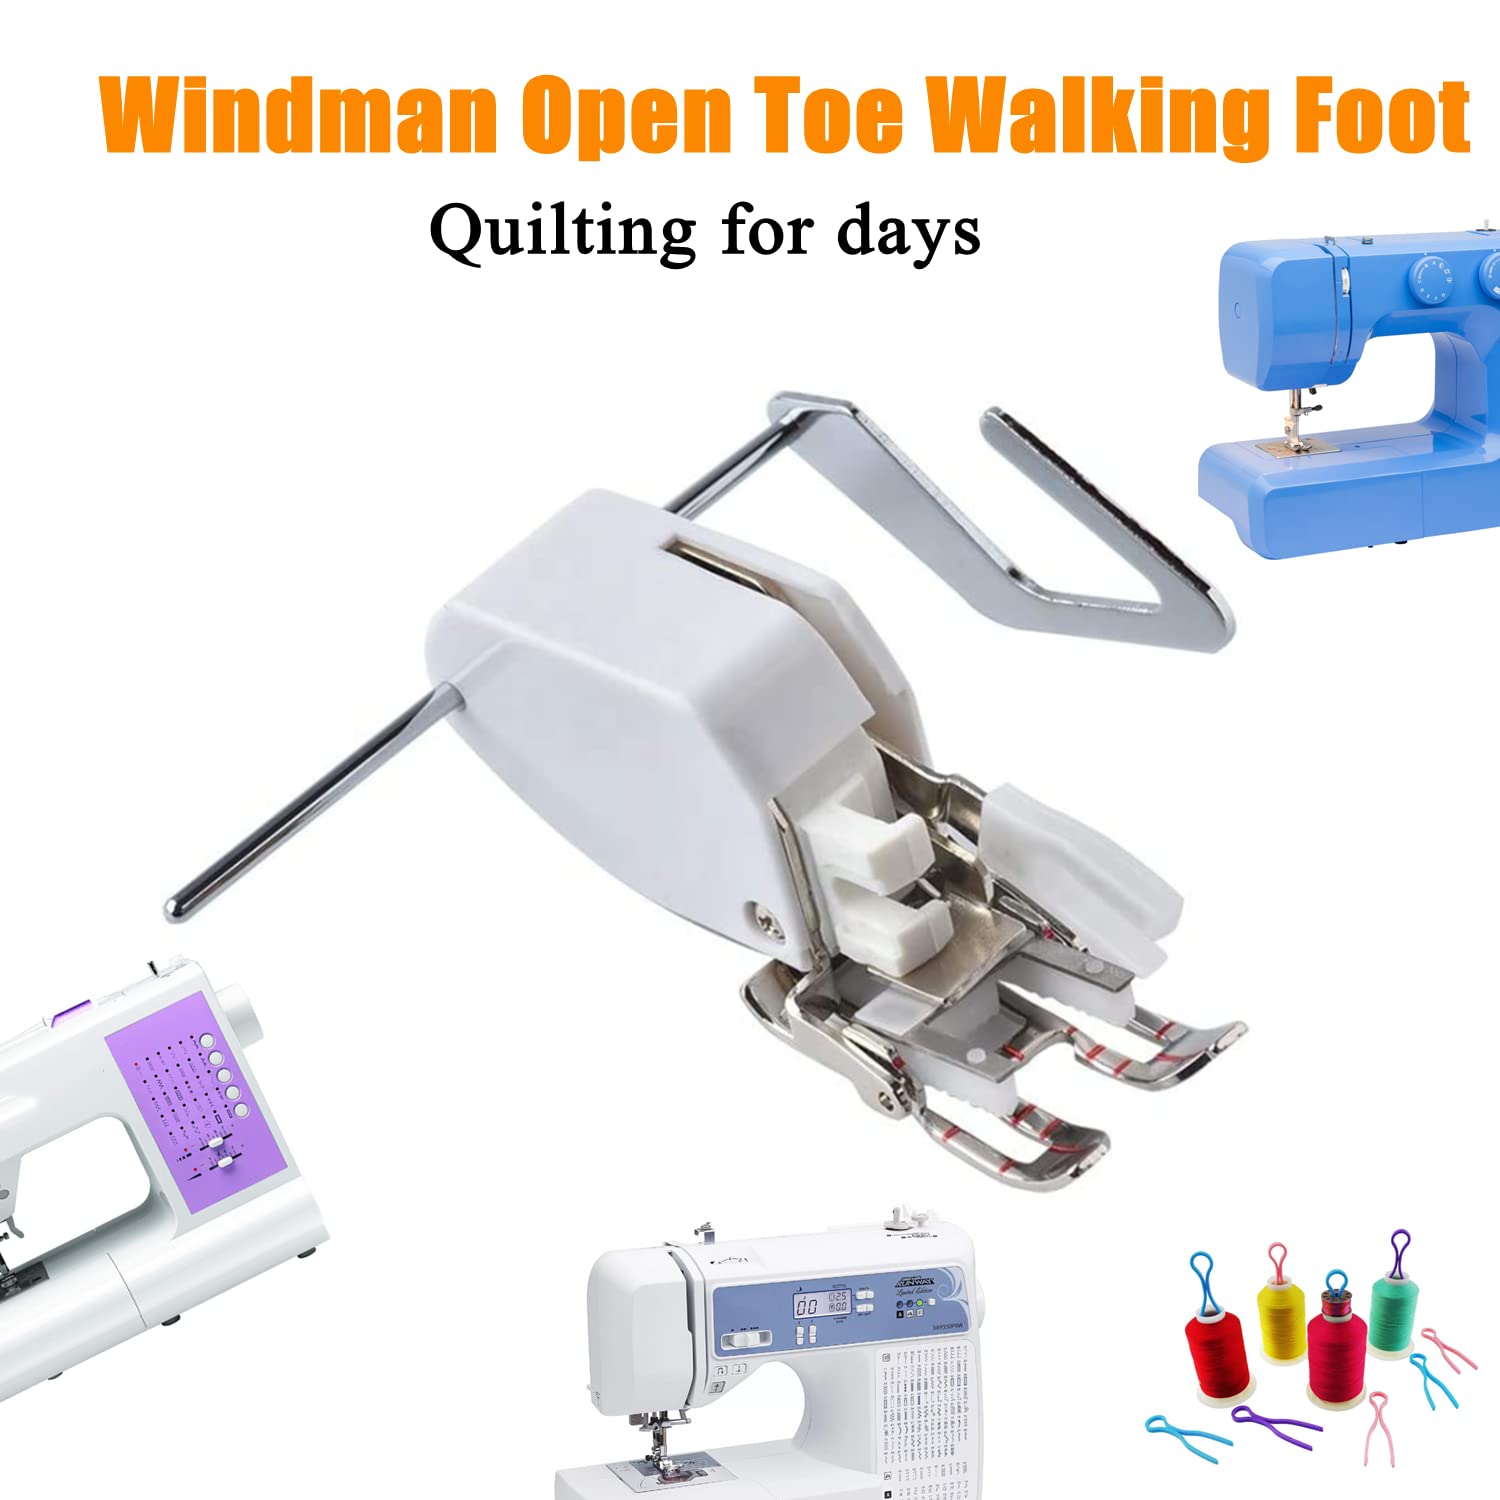 Windman Open Toe Walking Foot W/Guide for Quilting and Sewing Stitch Through Multiple Layers for Brother Singer Janome Sewing Machines